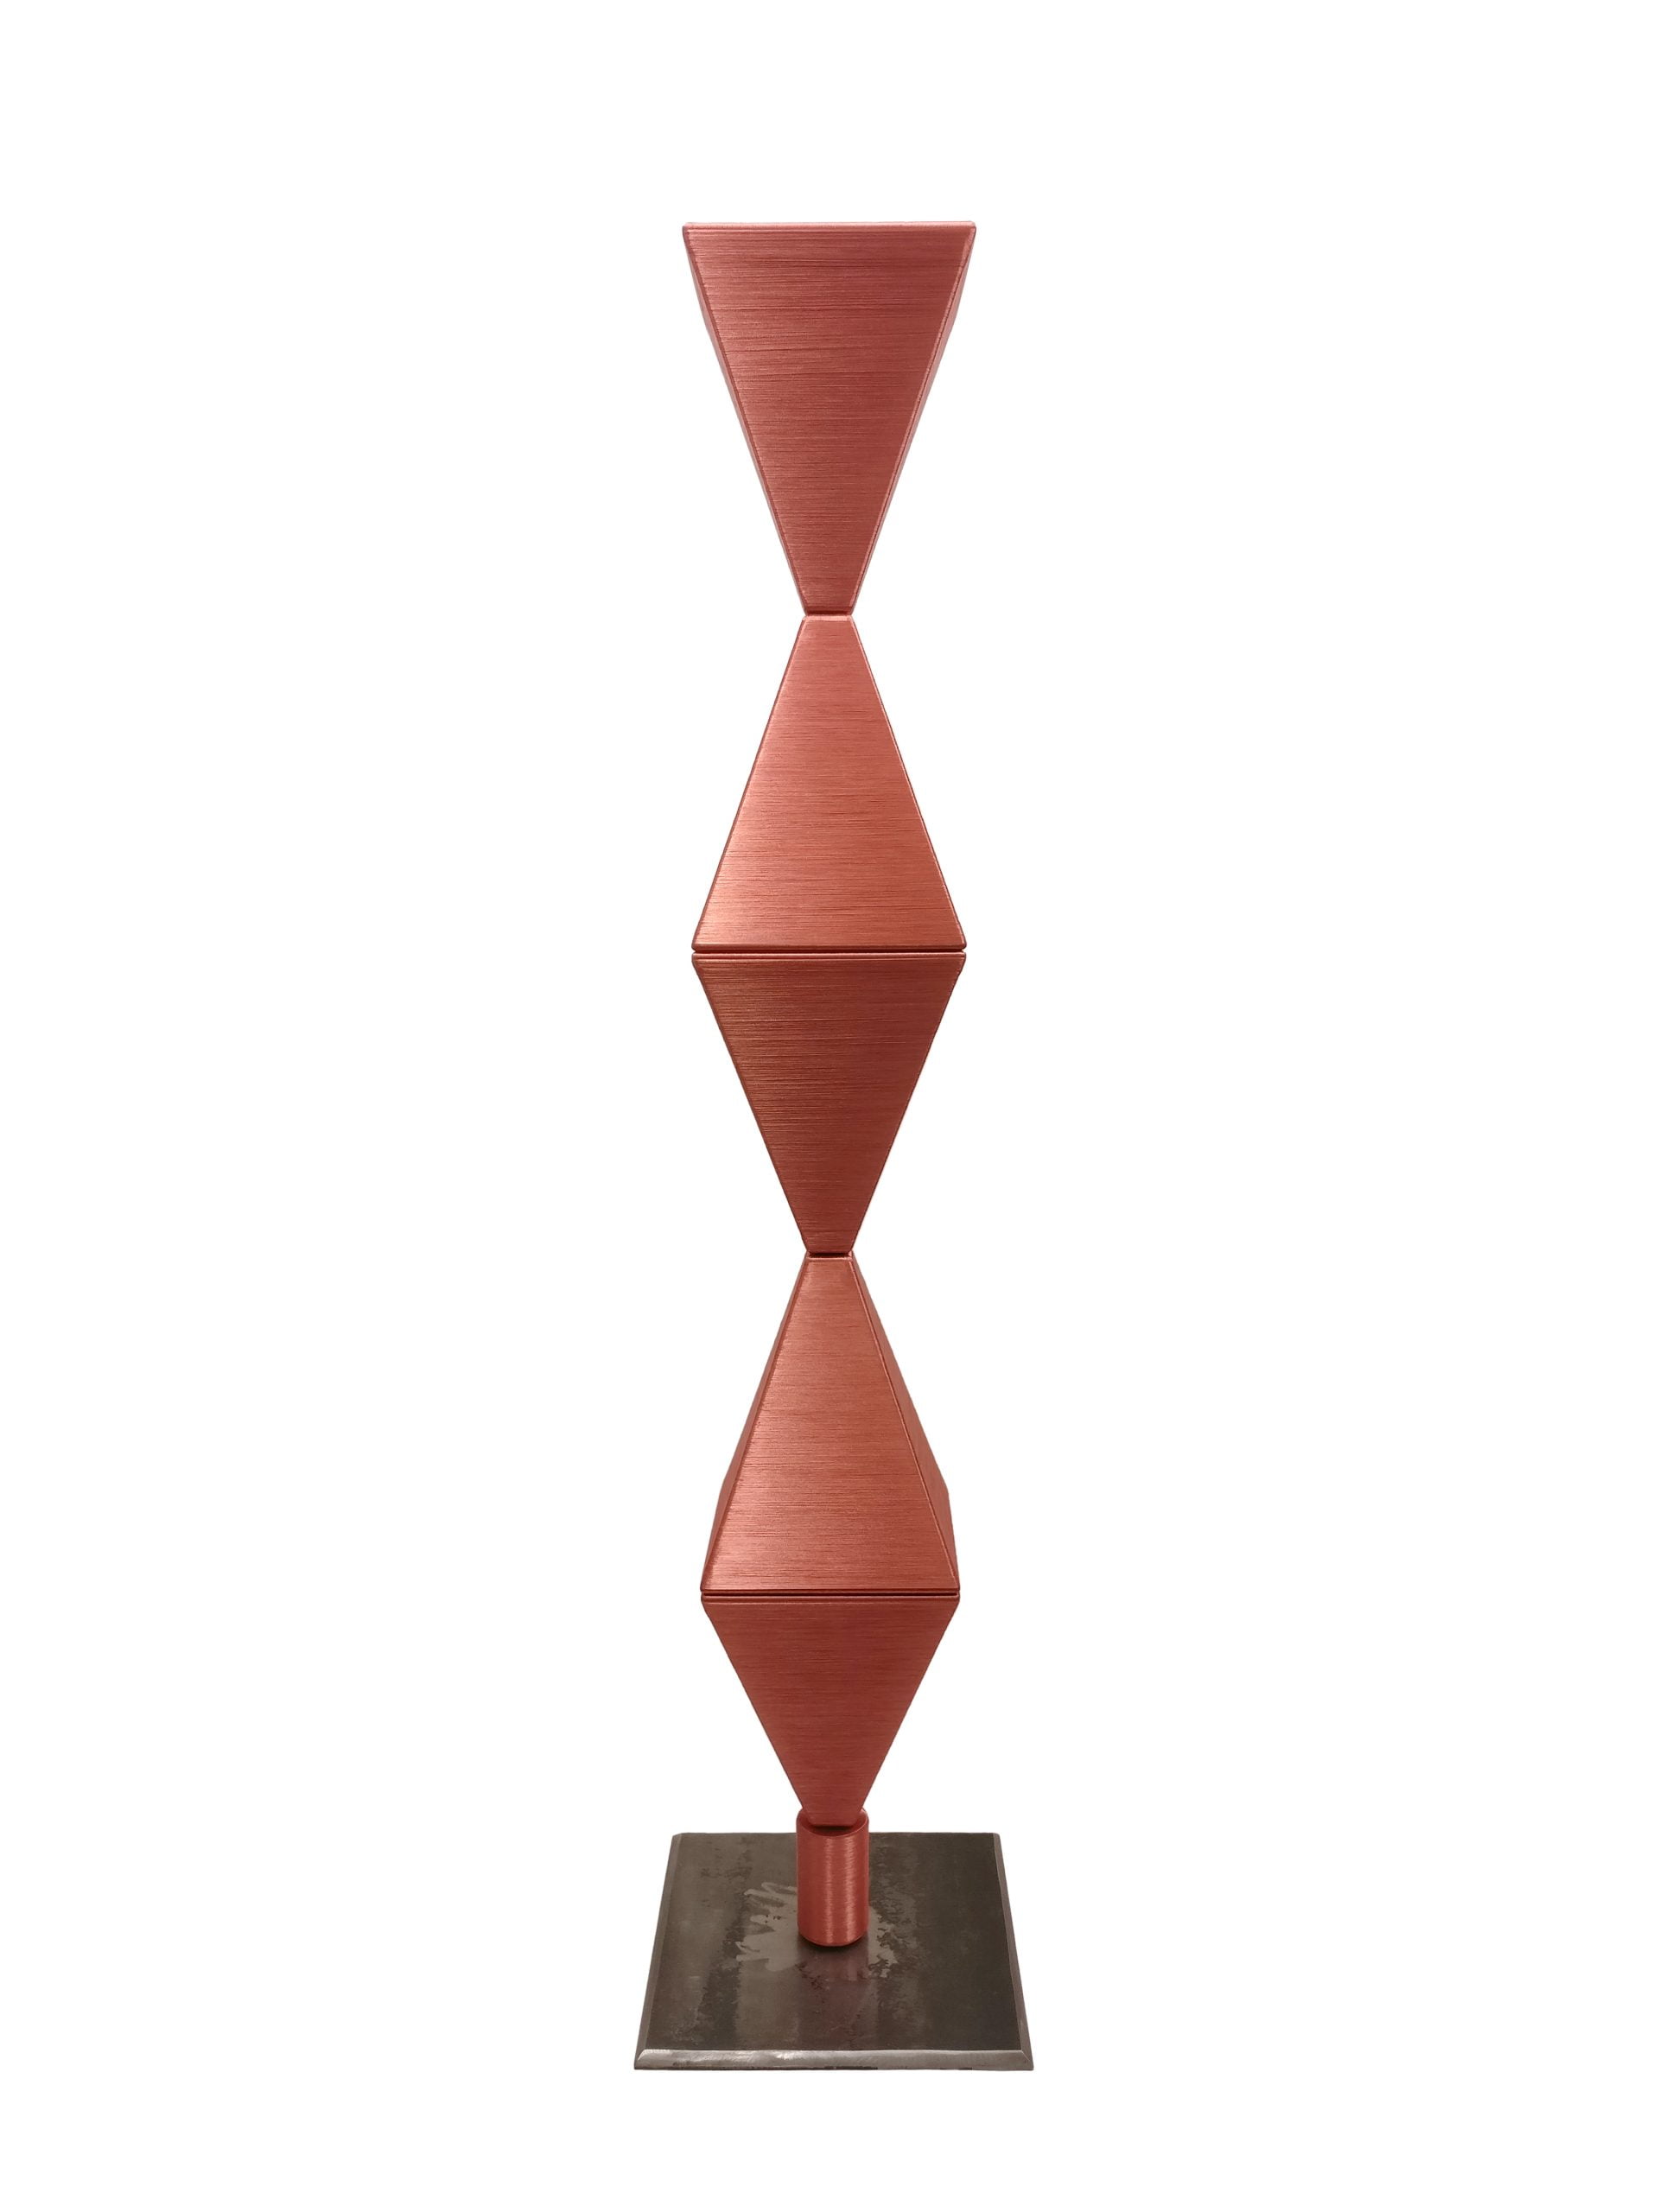 "Spiritual Machines, Totem 11" recycled objects: Alexa virtual assistant, pyramid speakers assembled in the Brancusi way, eco-friendly copper-coloured wire, 195 × 76 cm, 2019